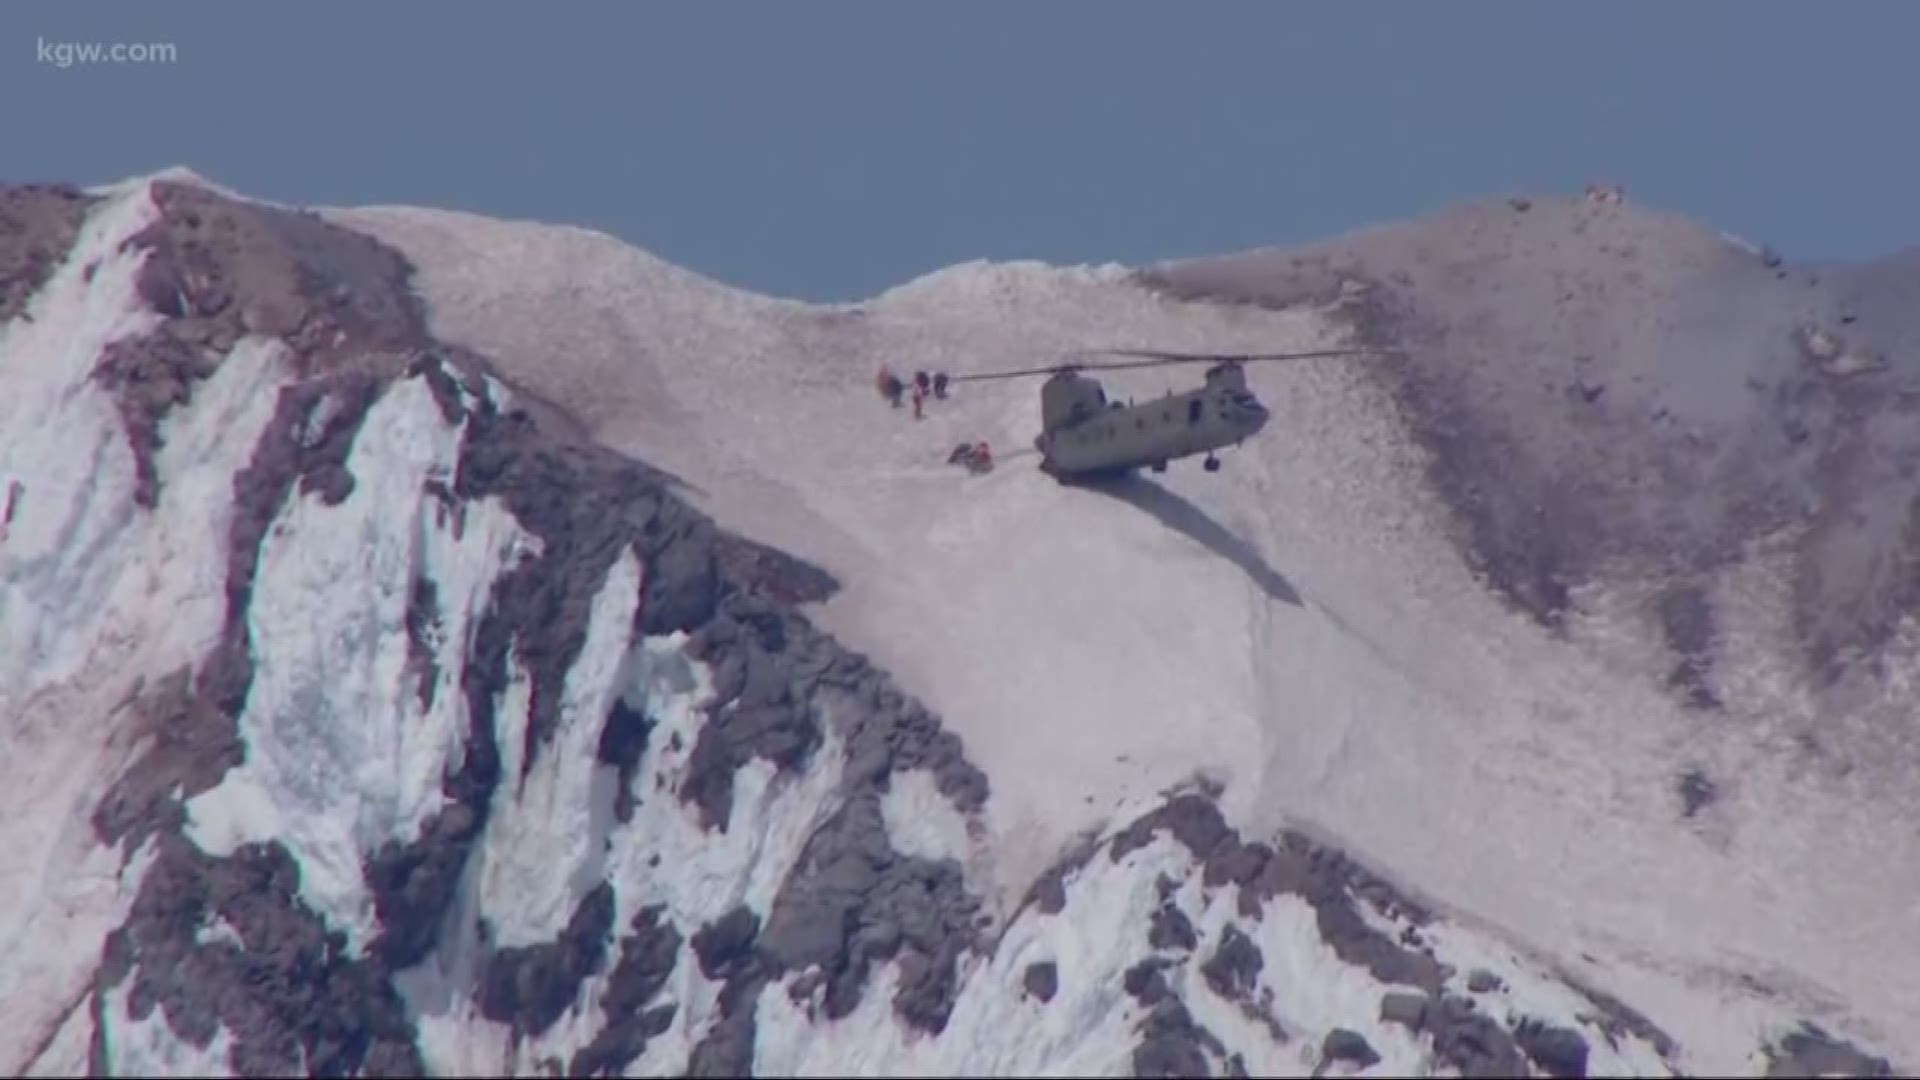 An amazing helicopter rescue at the top of Oregon's tallest mountain.